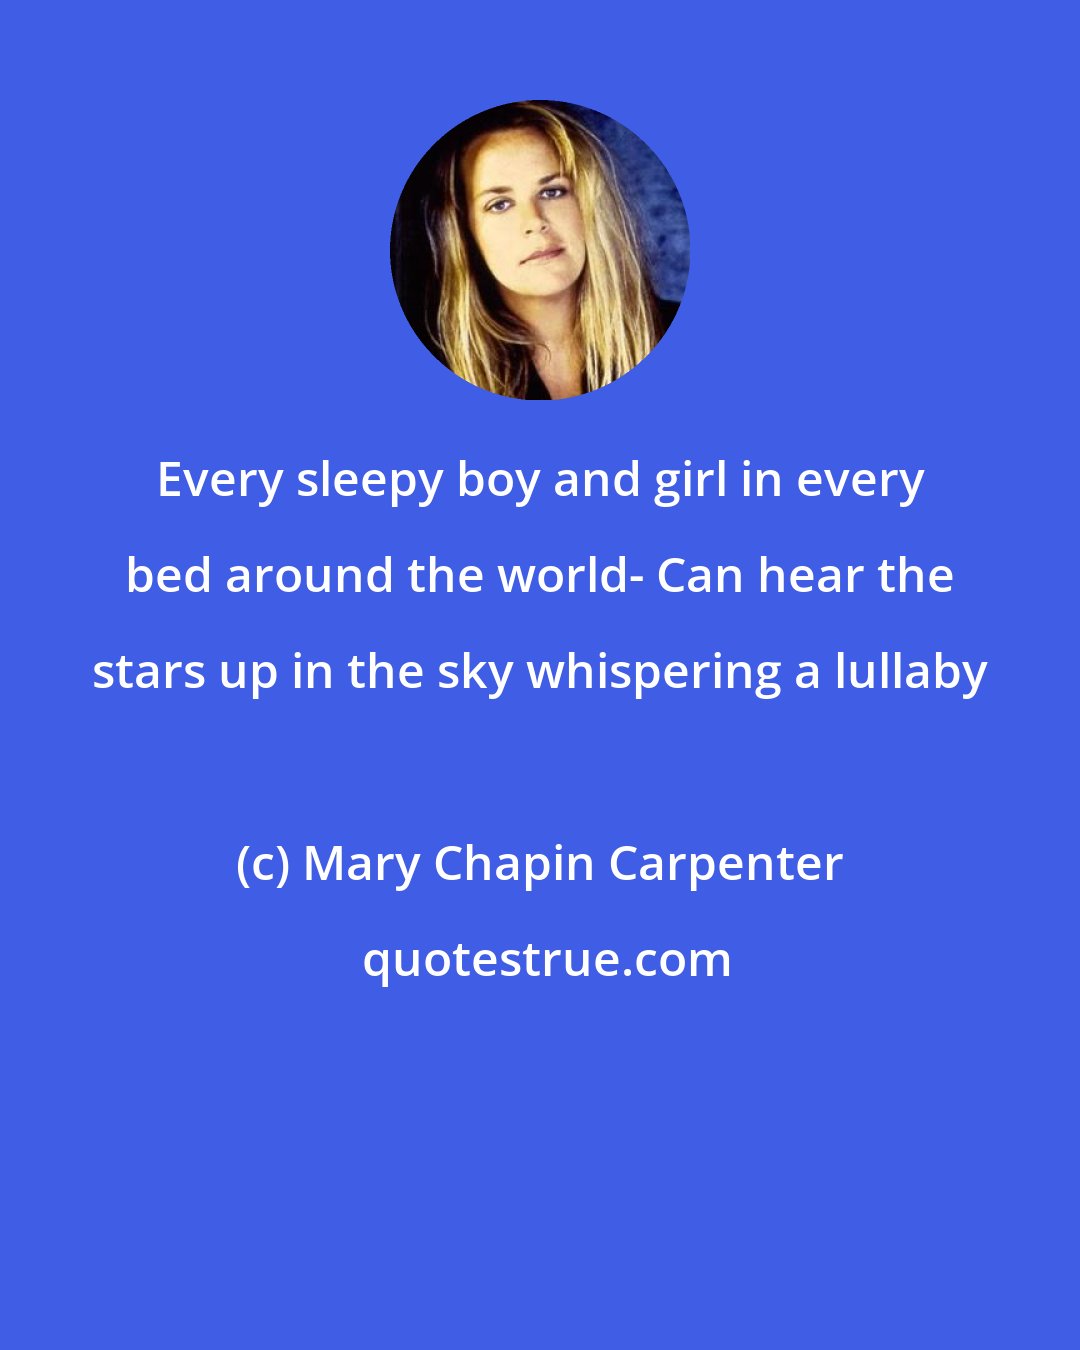 Mary Chapin Carpenter: Every sleepy boy and girl in every bed around the world- Can hear the stars up in the sky whispering a lullaby